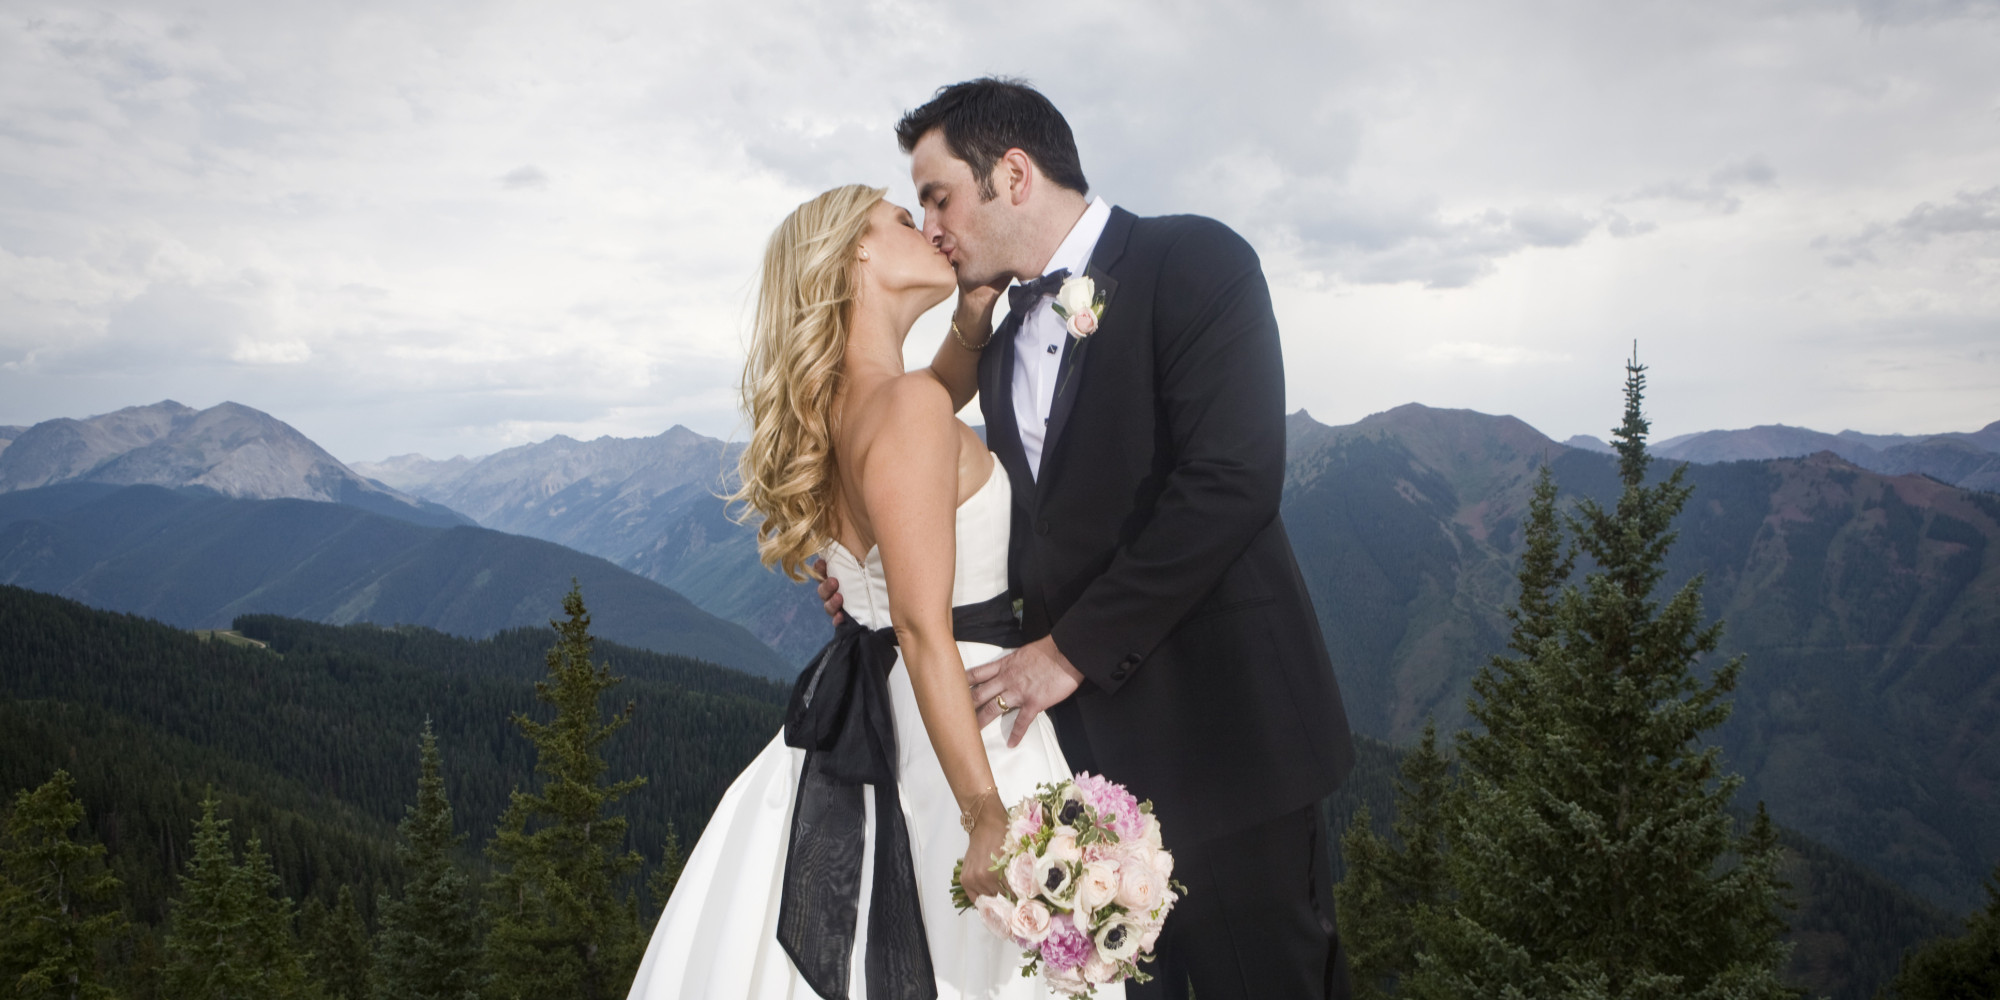 A quick look out at the Canada immigration rules and regulations for Marriage Based Visa